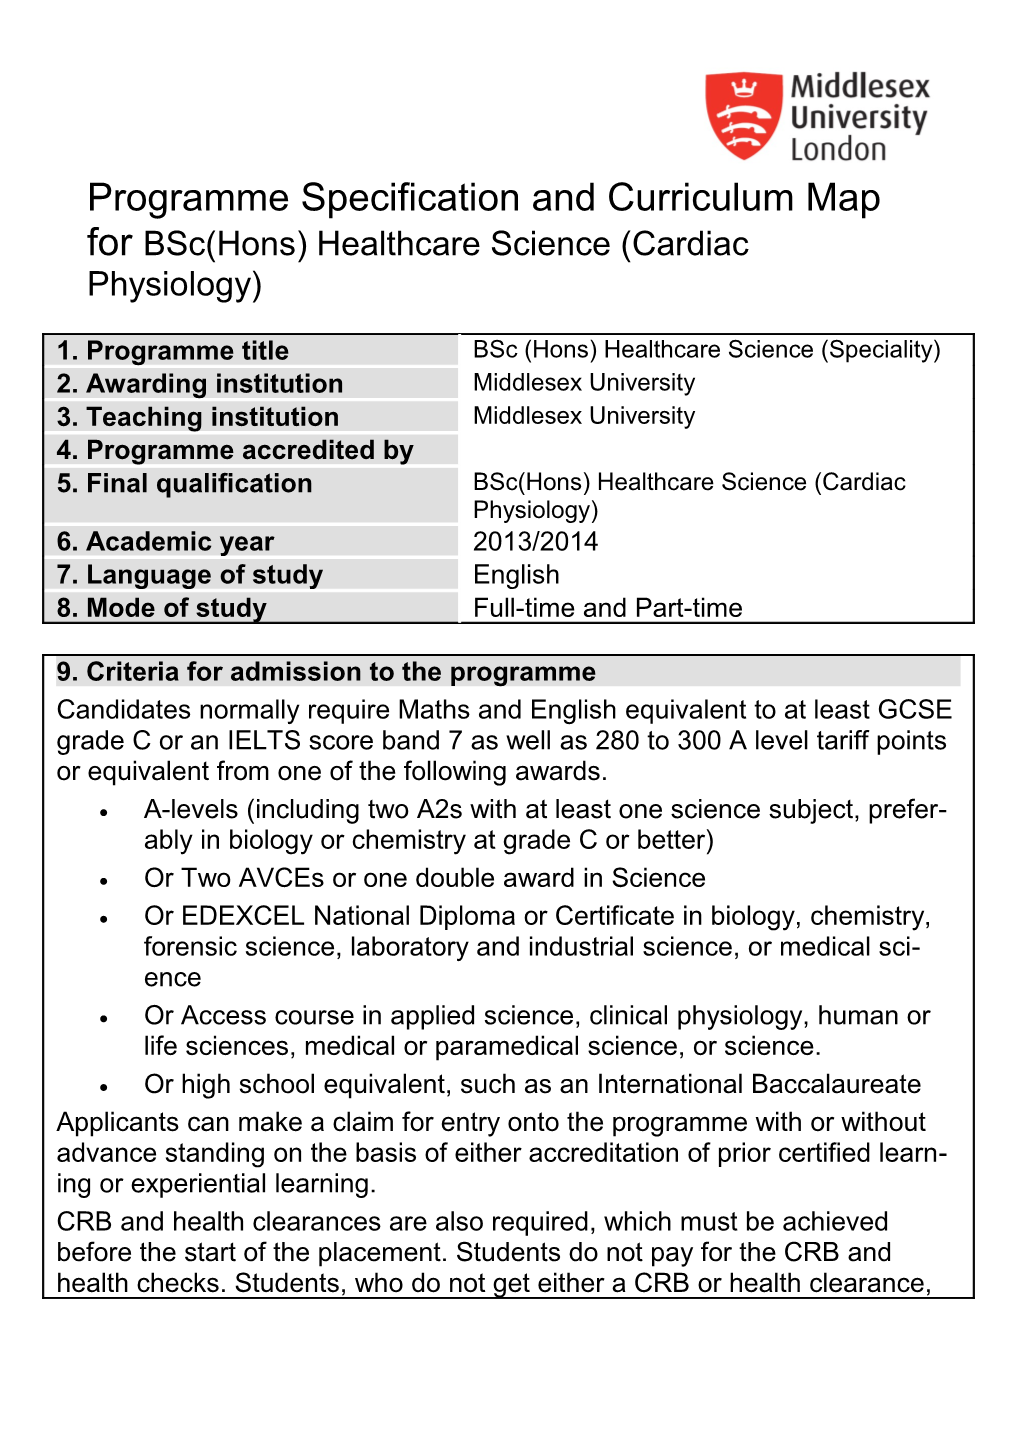 Programme Specification and Curriculum Map for Bsc(Hons) Healthcare Science (Cardiac Physiology)